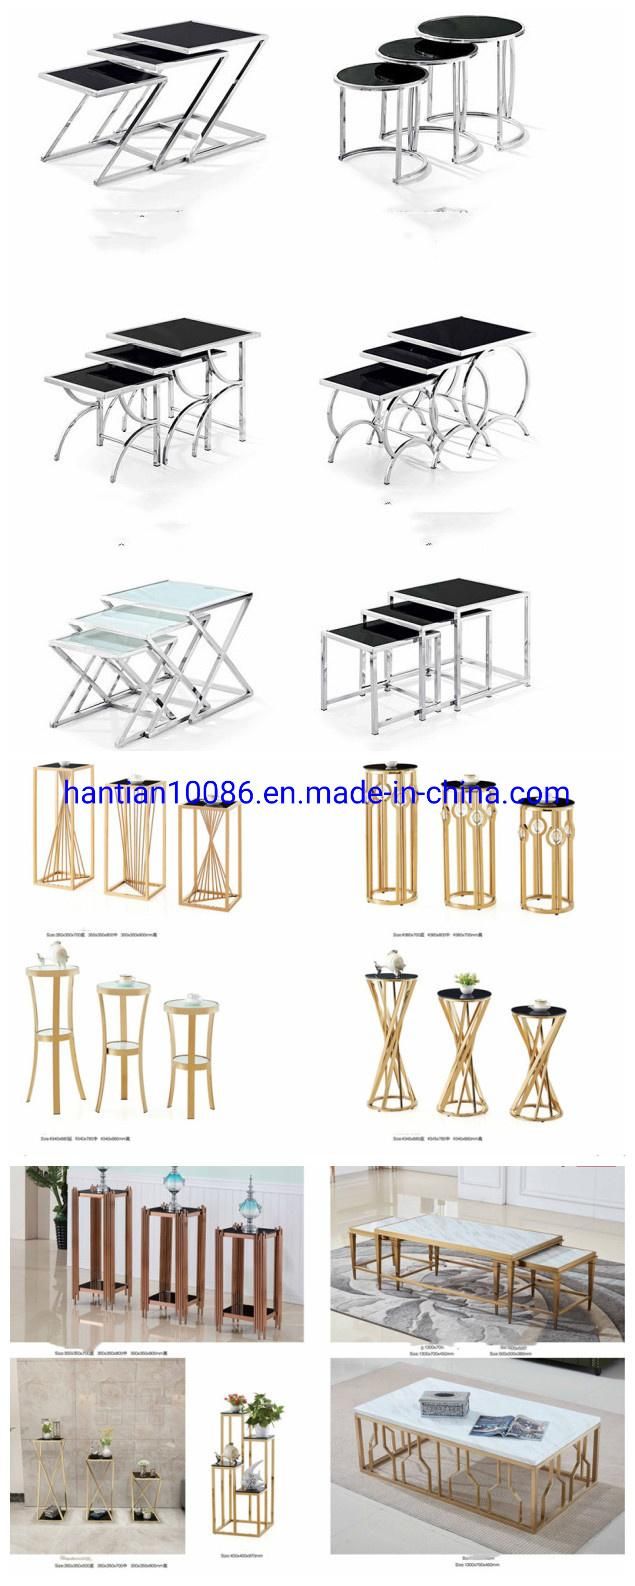 Event Hall Dining Restaurant Furniture Metal Lounge Leisure Living Room Round Table